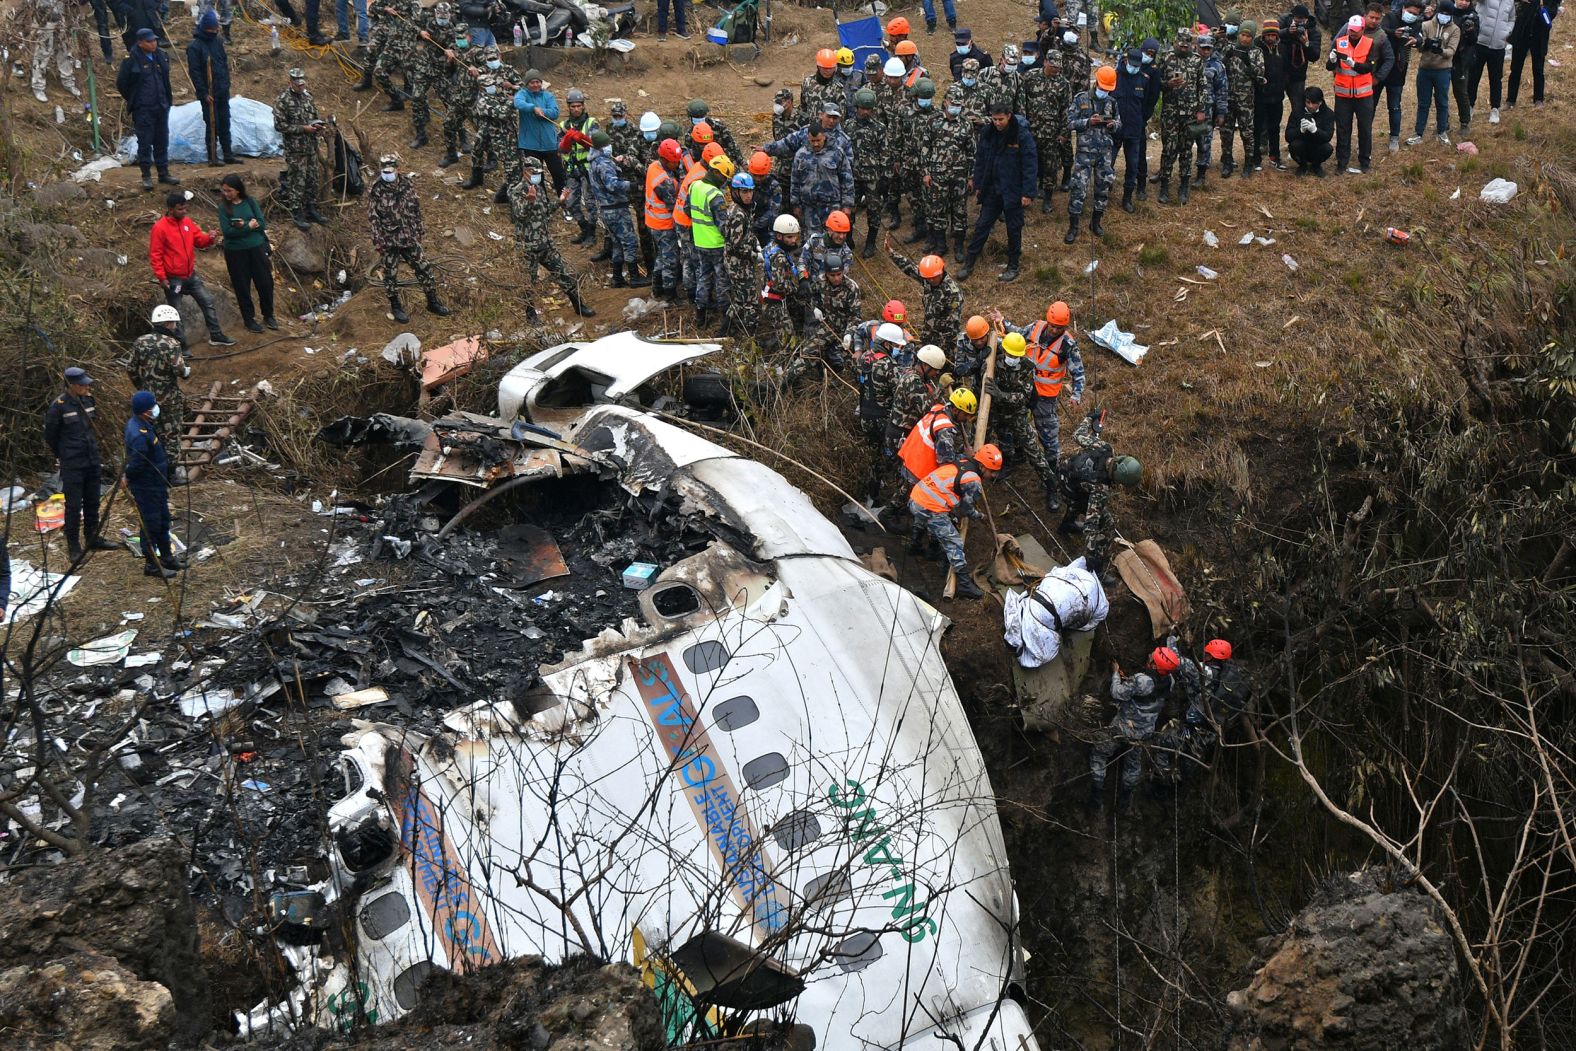 Rescuers pull the body of a victim who died in a <a href="index.php?page=&url=https%3A%2F%2Fwww.cnn.com%2F2023%2F01%2F17%2Fasia%2Fnepal-plane-crash-yeti-airlines-video-intl-hnk%2Findex.html" target="_blank">Yeti Airlines plane crash</a> in Pokhara, Nepal, on Monday, January 16. There were 72 people on board, including four crew members, according to an airline spokesperson. With all but one body recovered, the crash marks the country's <a href="index.php?page=&url=https%3A%2F%2Fwww.cnn.com%2F2023%2F01%2F15%2Fasia%2Fnepal-air-travel-risks-intl%2Findex.html" target="_blank">deadliest air disaster</a> in more than 30 years.